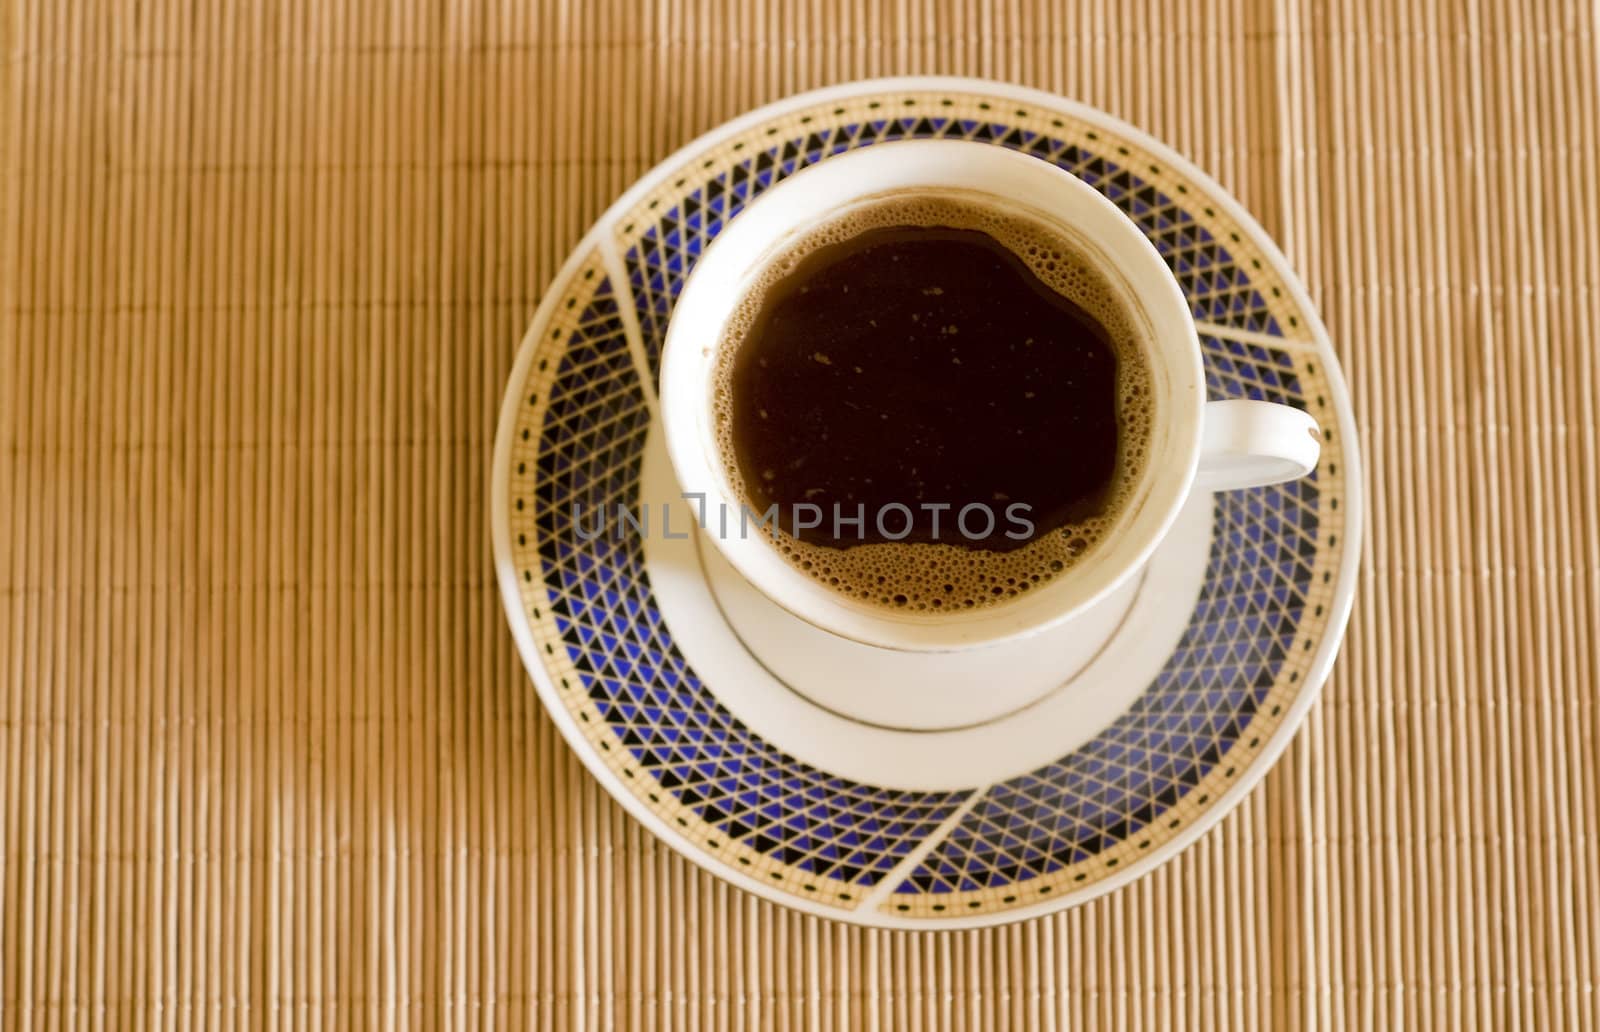 Perspective view - cup of black / Turkish coffee